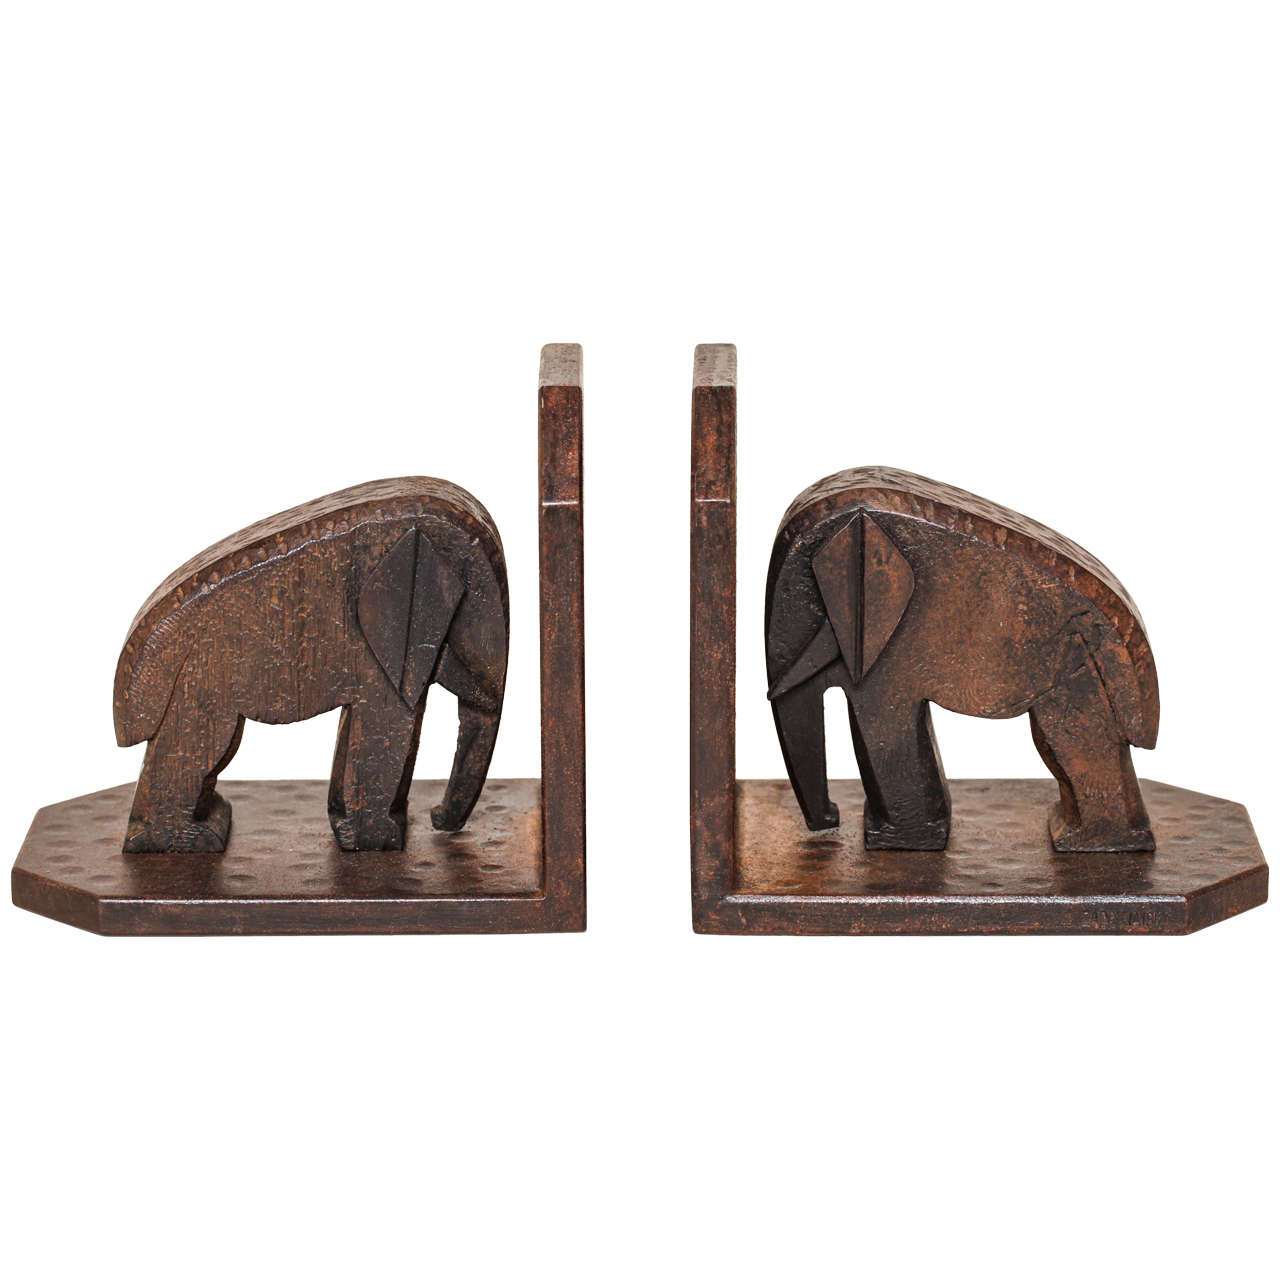 Michel Zadounaisky French Art Deco Wrought Iron Elephant Bookends For Sale